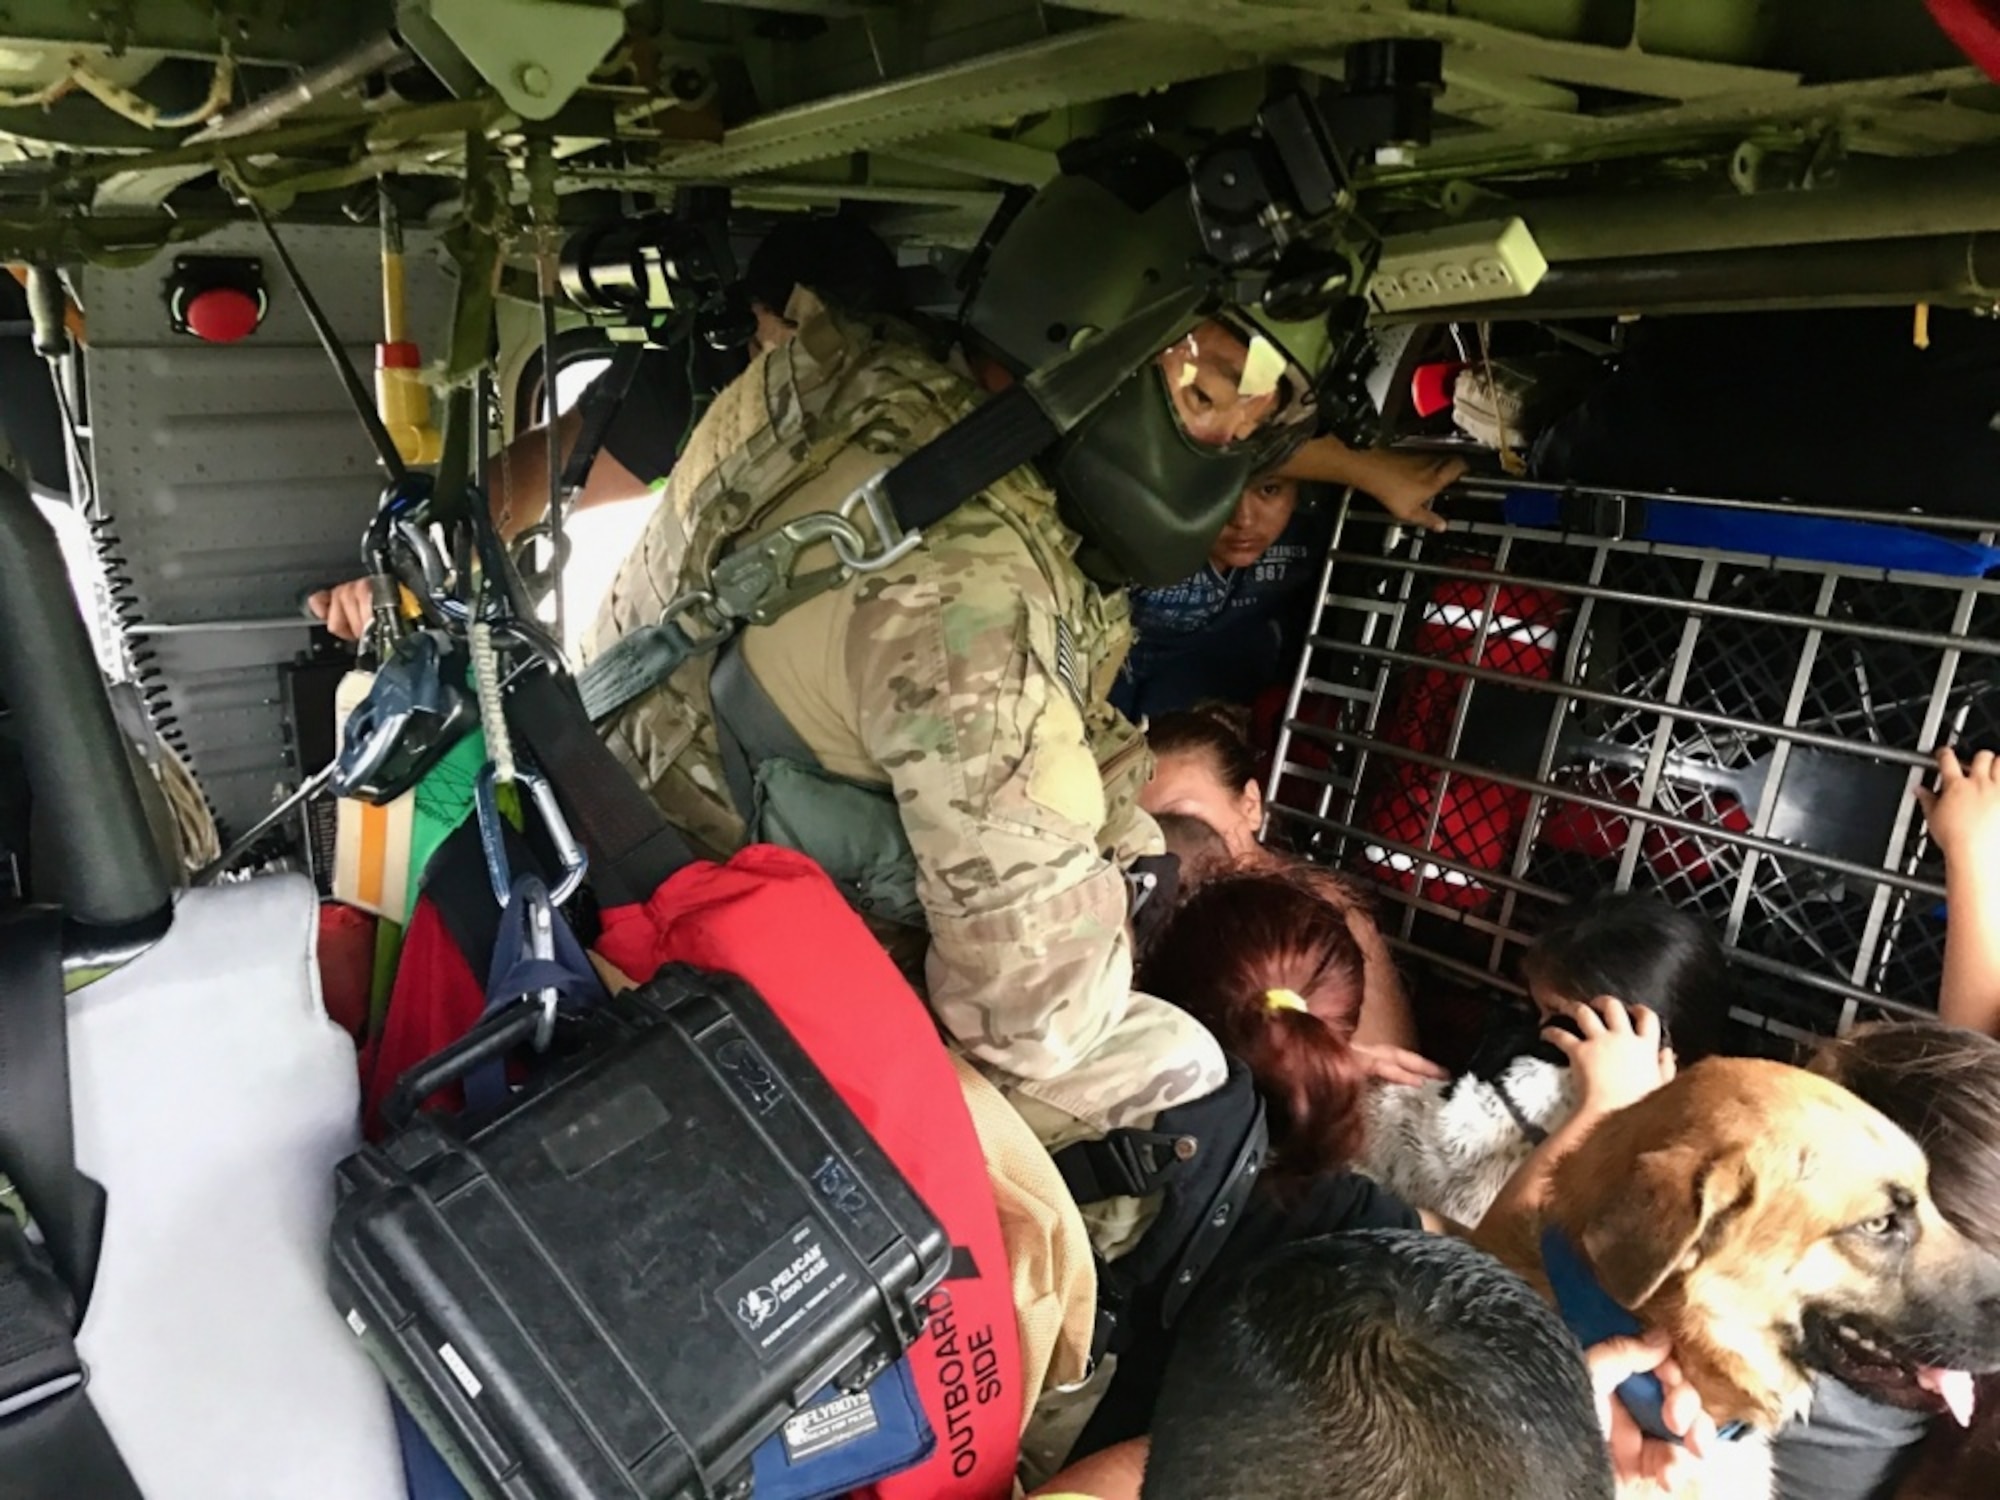 Senior Airman Davy Brinkmann, 920th Rescue Wing, Patrick Air Force Base, Florida, special missions aviations specialist, gets sight on a fellow pararescuemen below as they prepare to hoist two stranded victims of Hurricane Harvey Aug. 31, 2017 from Beaumont, Texas.